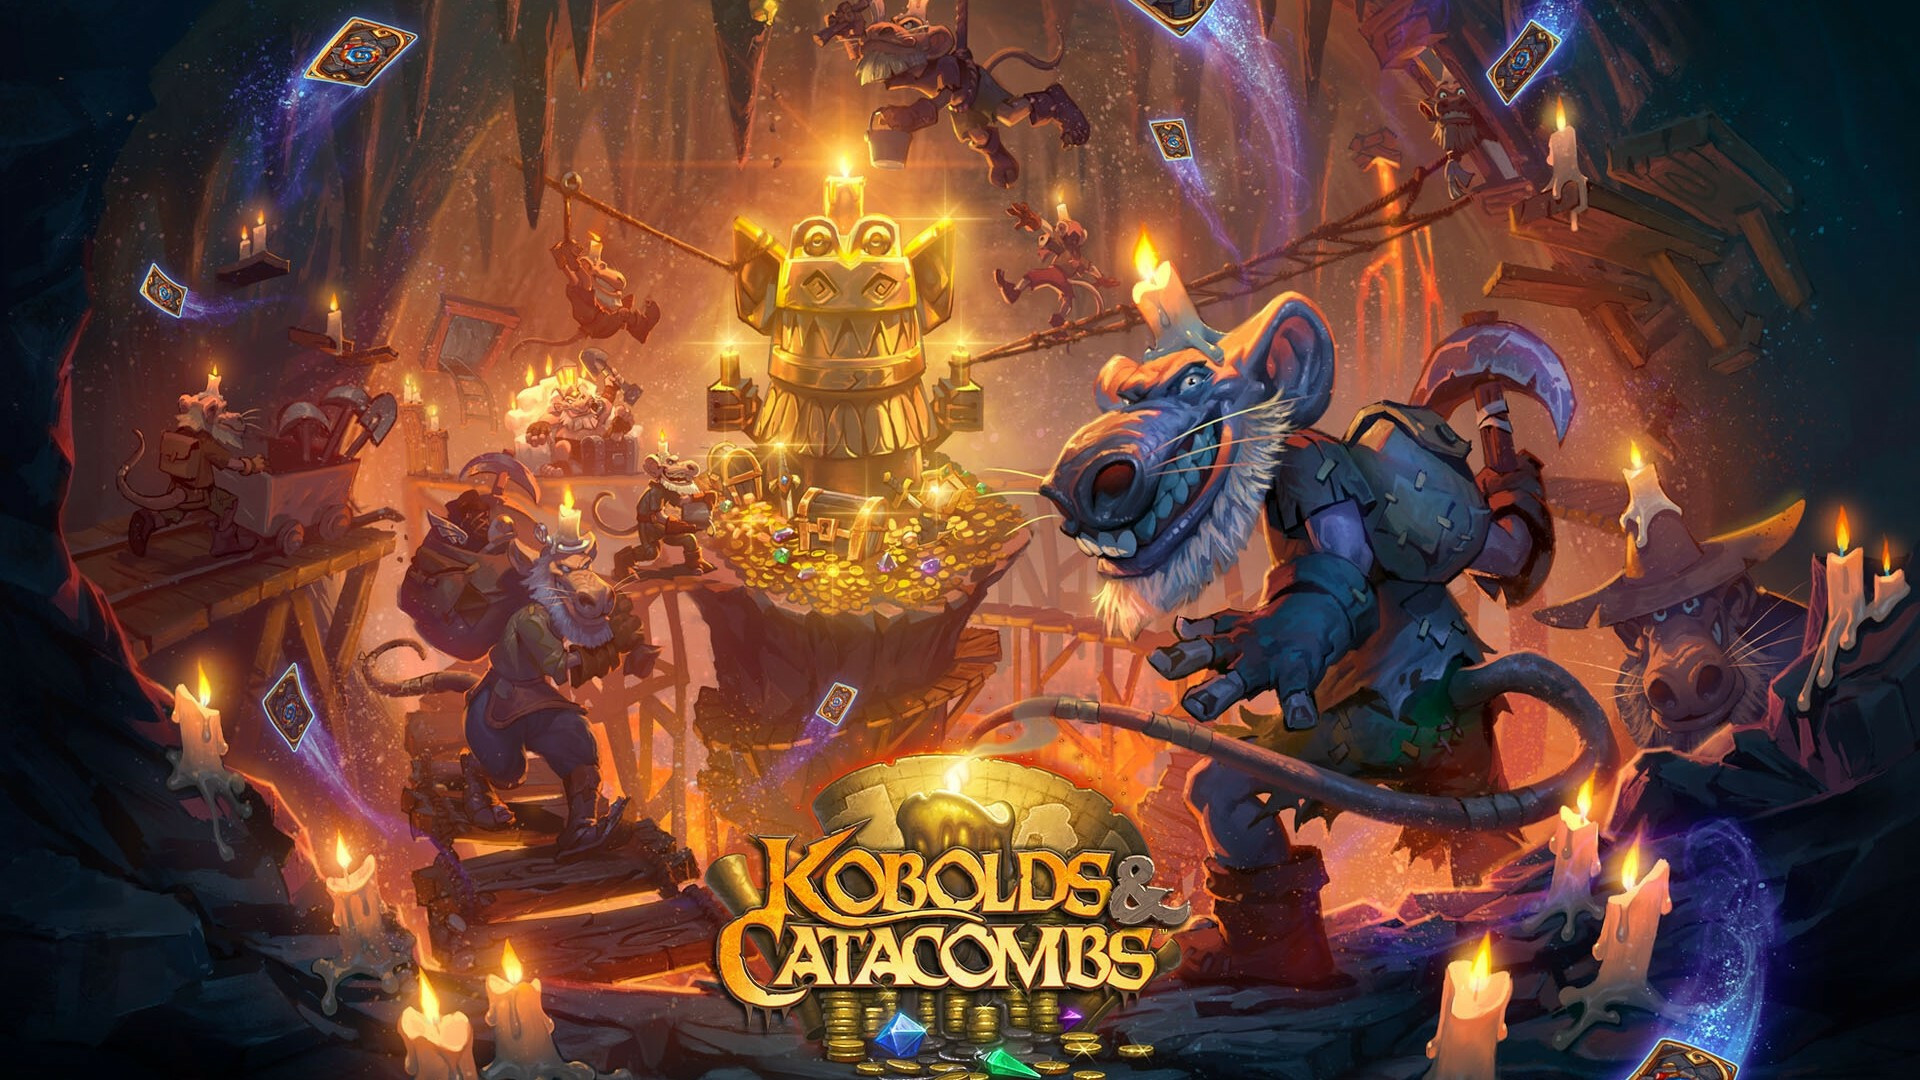 Hearthstone: Heroes Of Warcraft, Kobolds And Catacombs, Video Game. 1920x1080 Full HD Background.